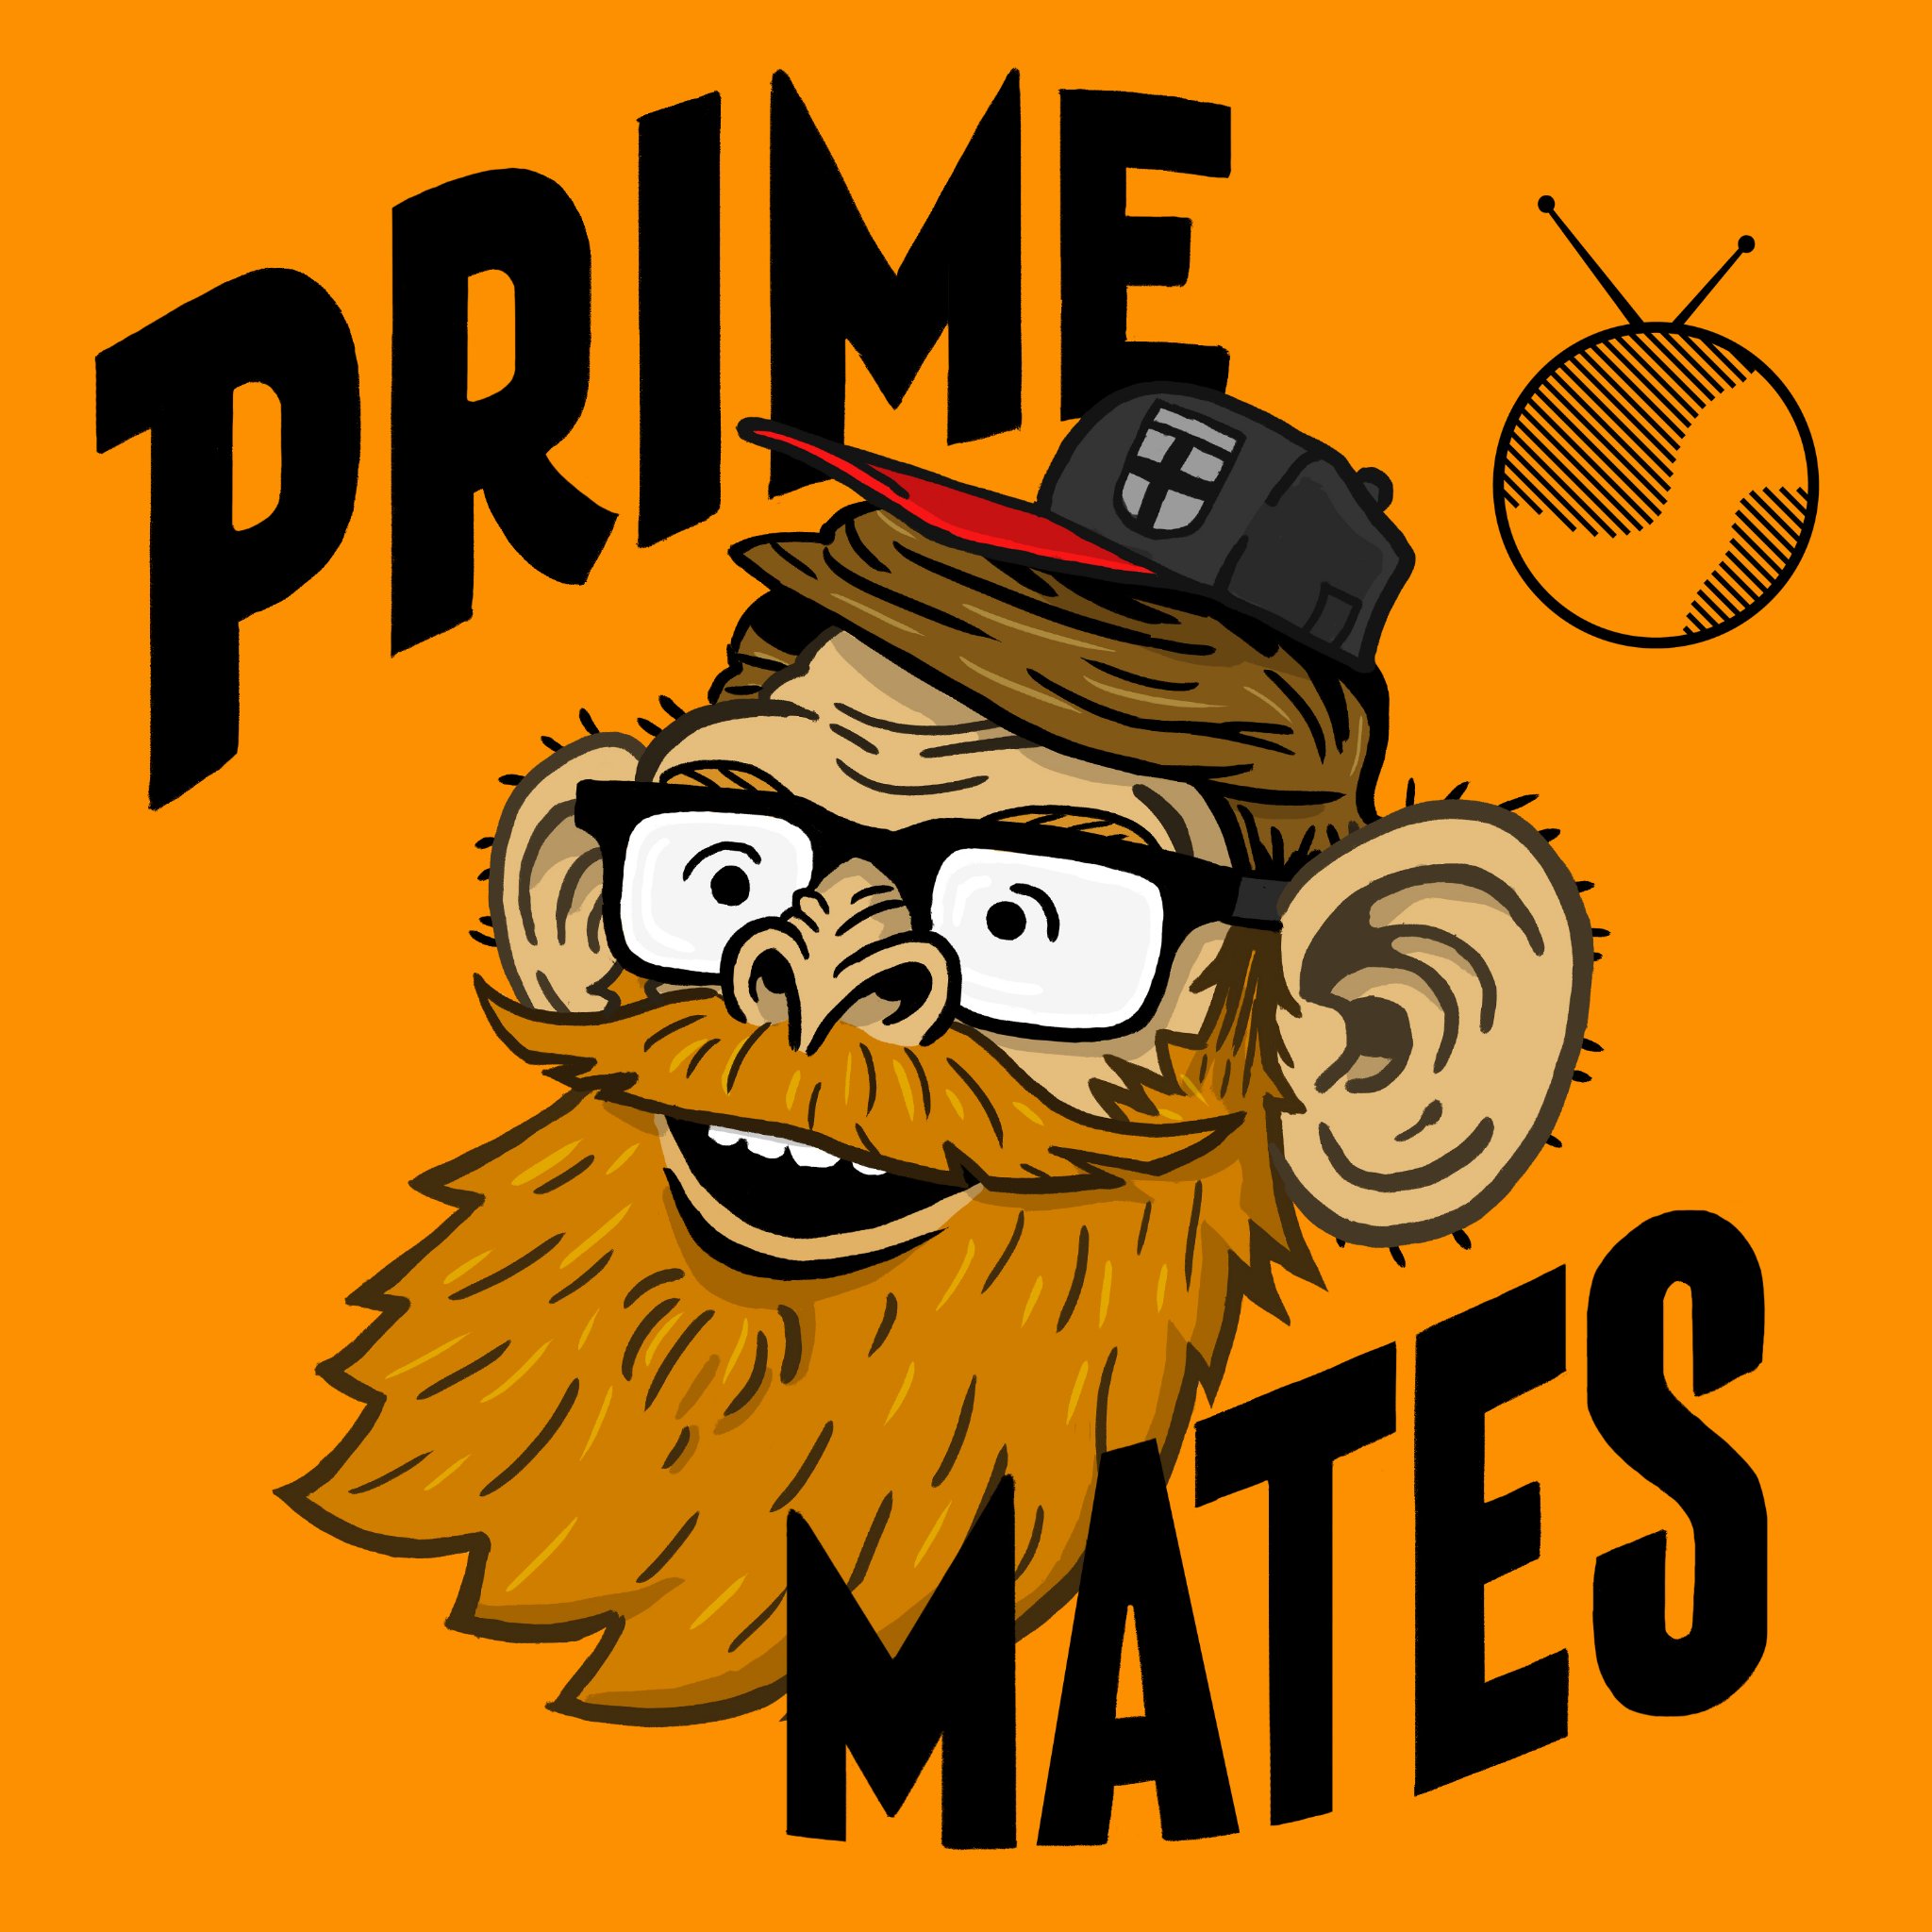 A podcast hosted by @mattstew_art focusing on primates in popular culture from chimpan-A to chimpan-Z! Make topic suggestions https://t.co/REMp7i0FYw